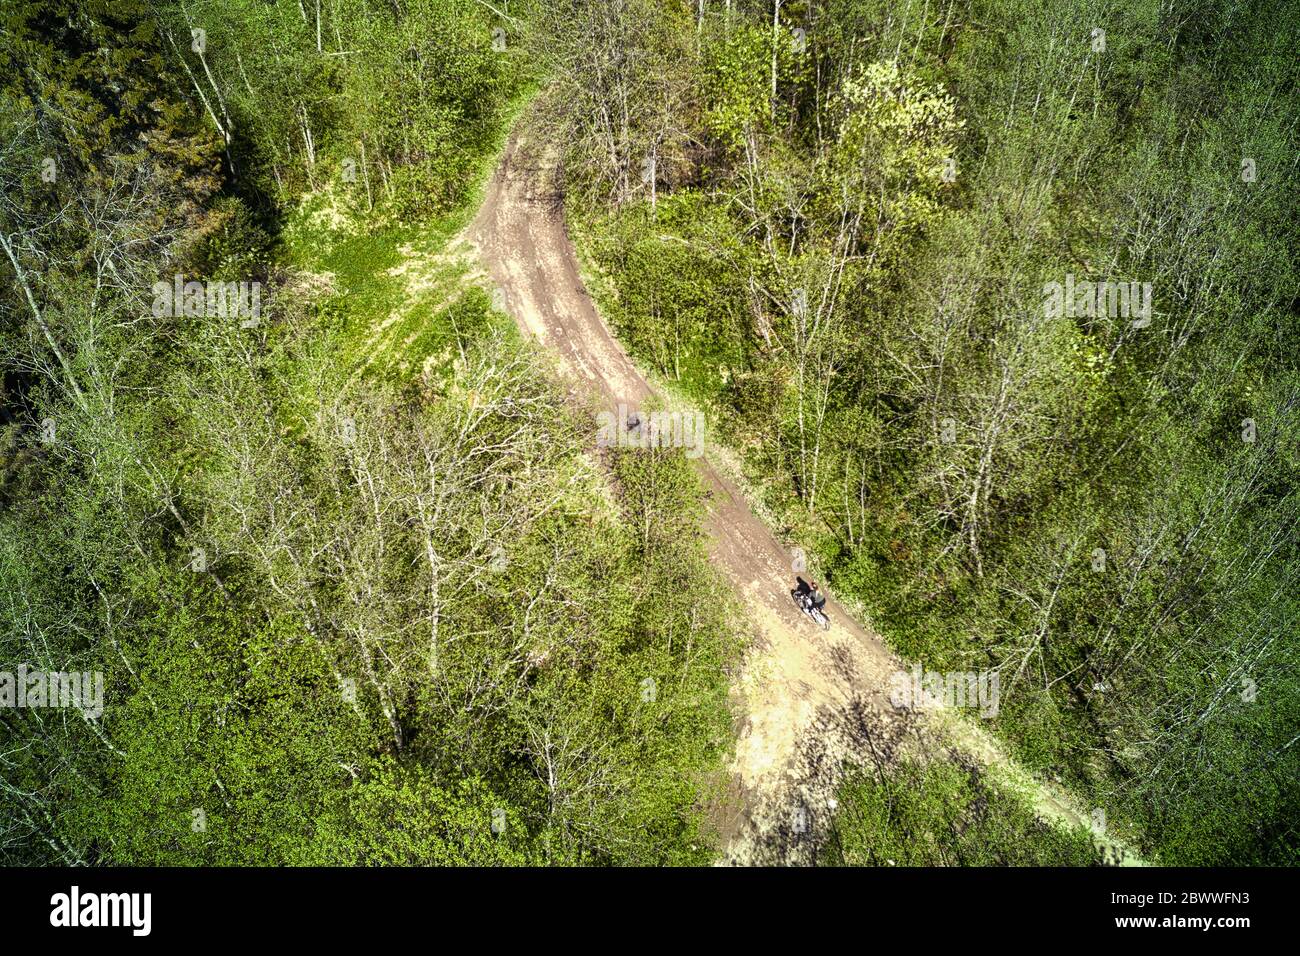 Road through deep forest with biker figure on it. Aerial view Stock Photo